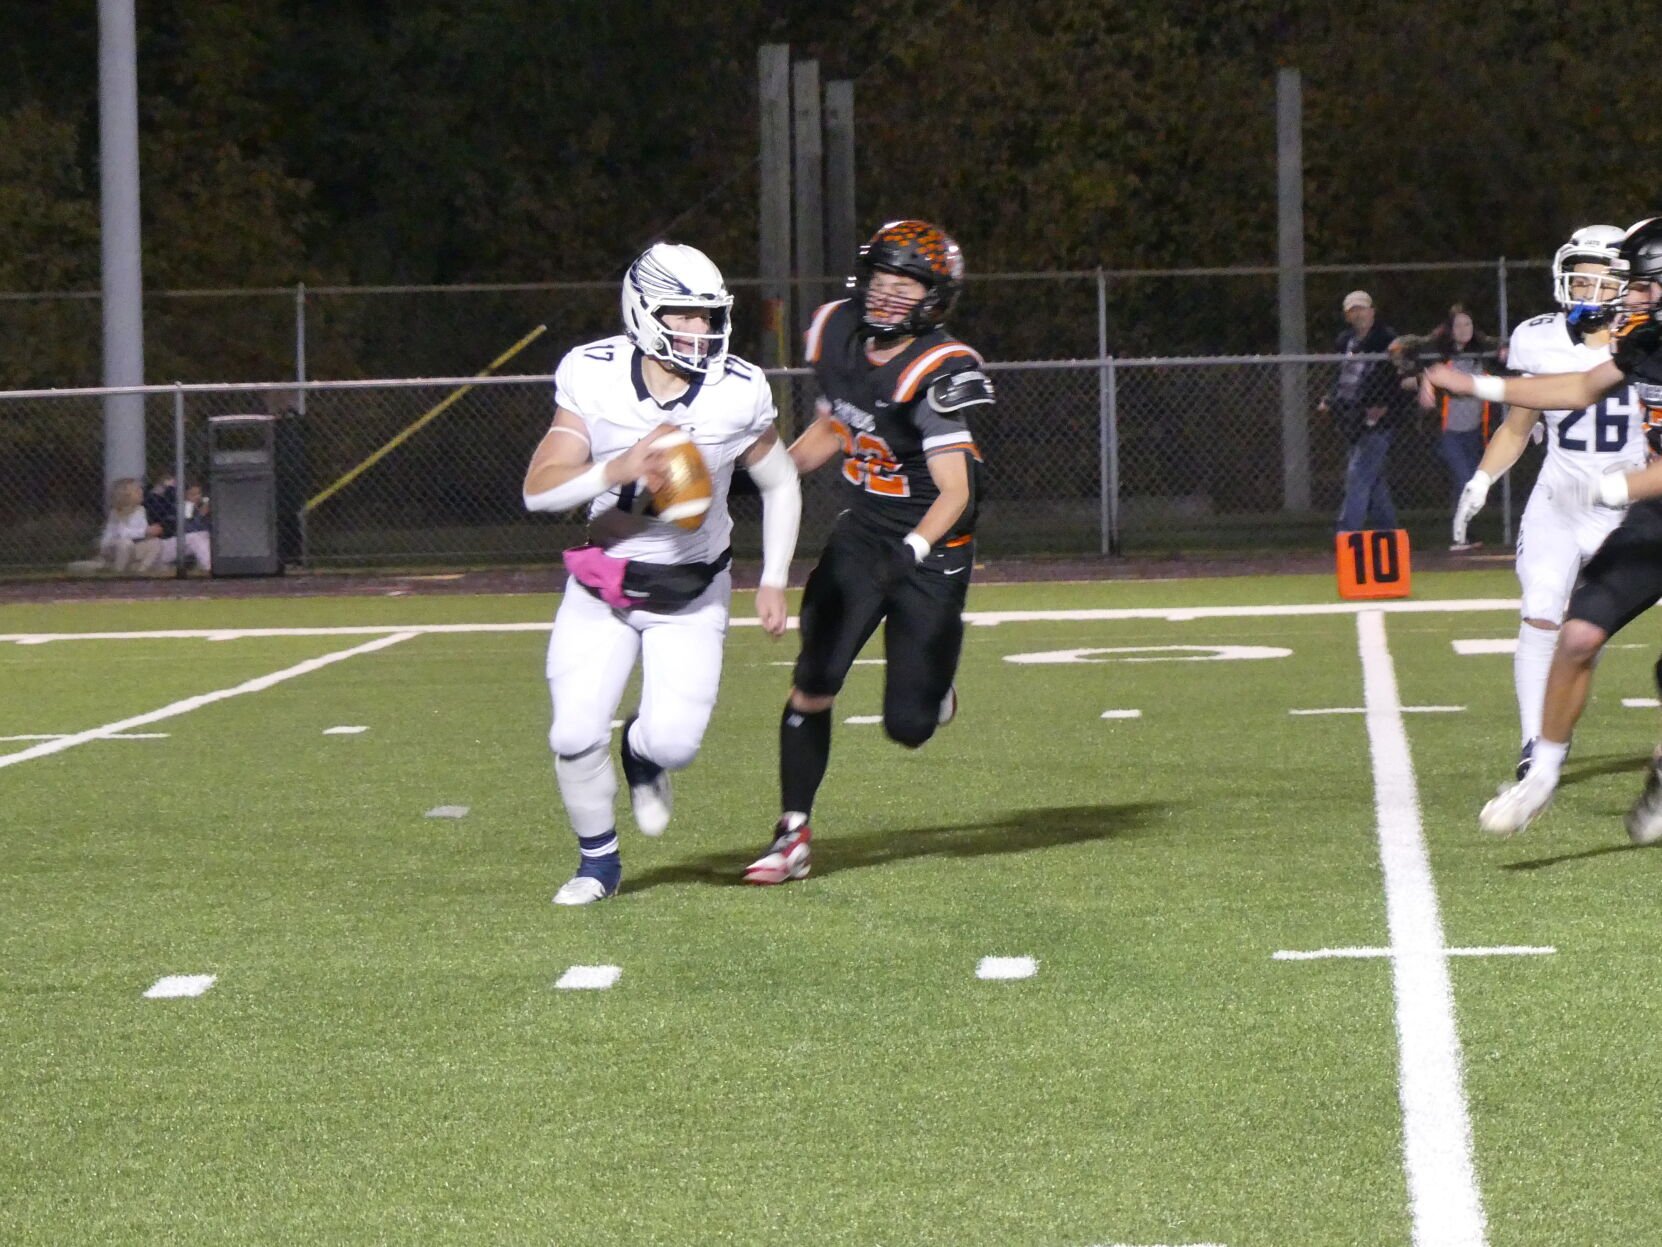 Menasha Bluejays Dominate Plymouth Panthers with 31-8 Victory in WIAA Level 1 Football Playoff